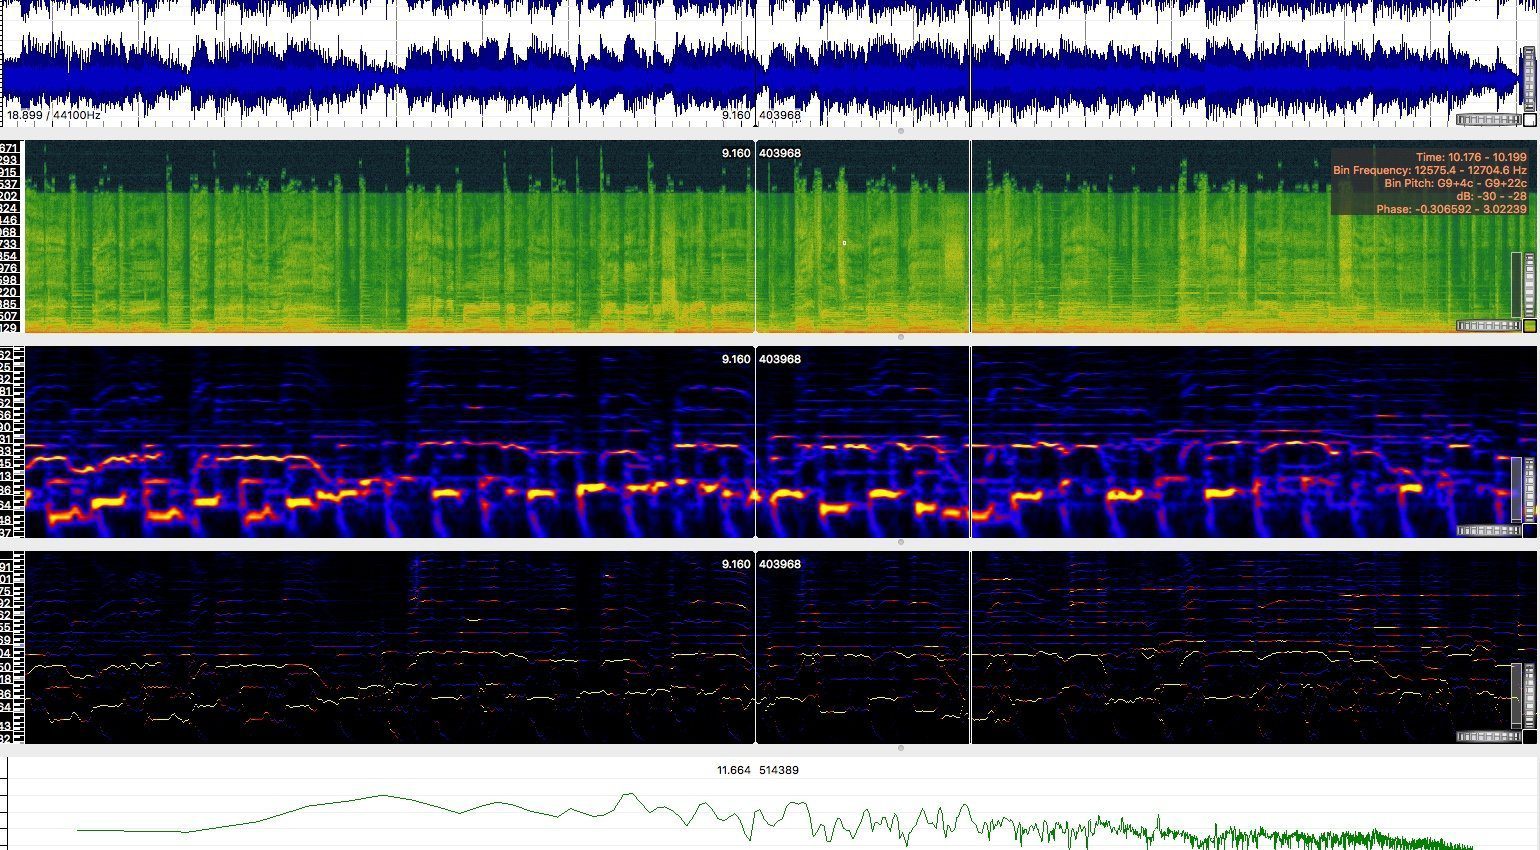 sonic visualiser and decoding audio files